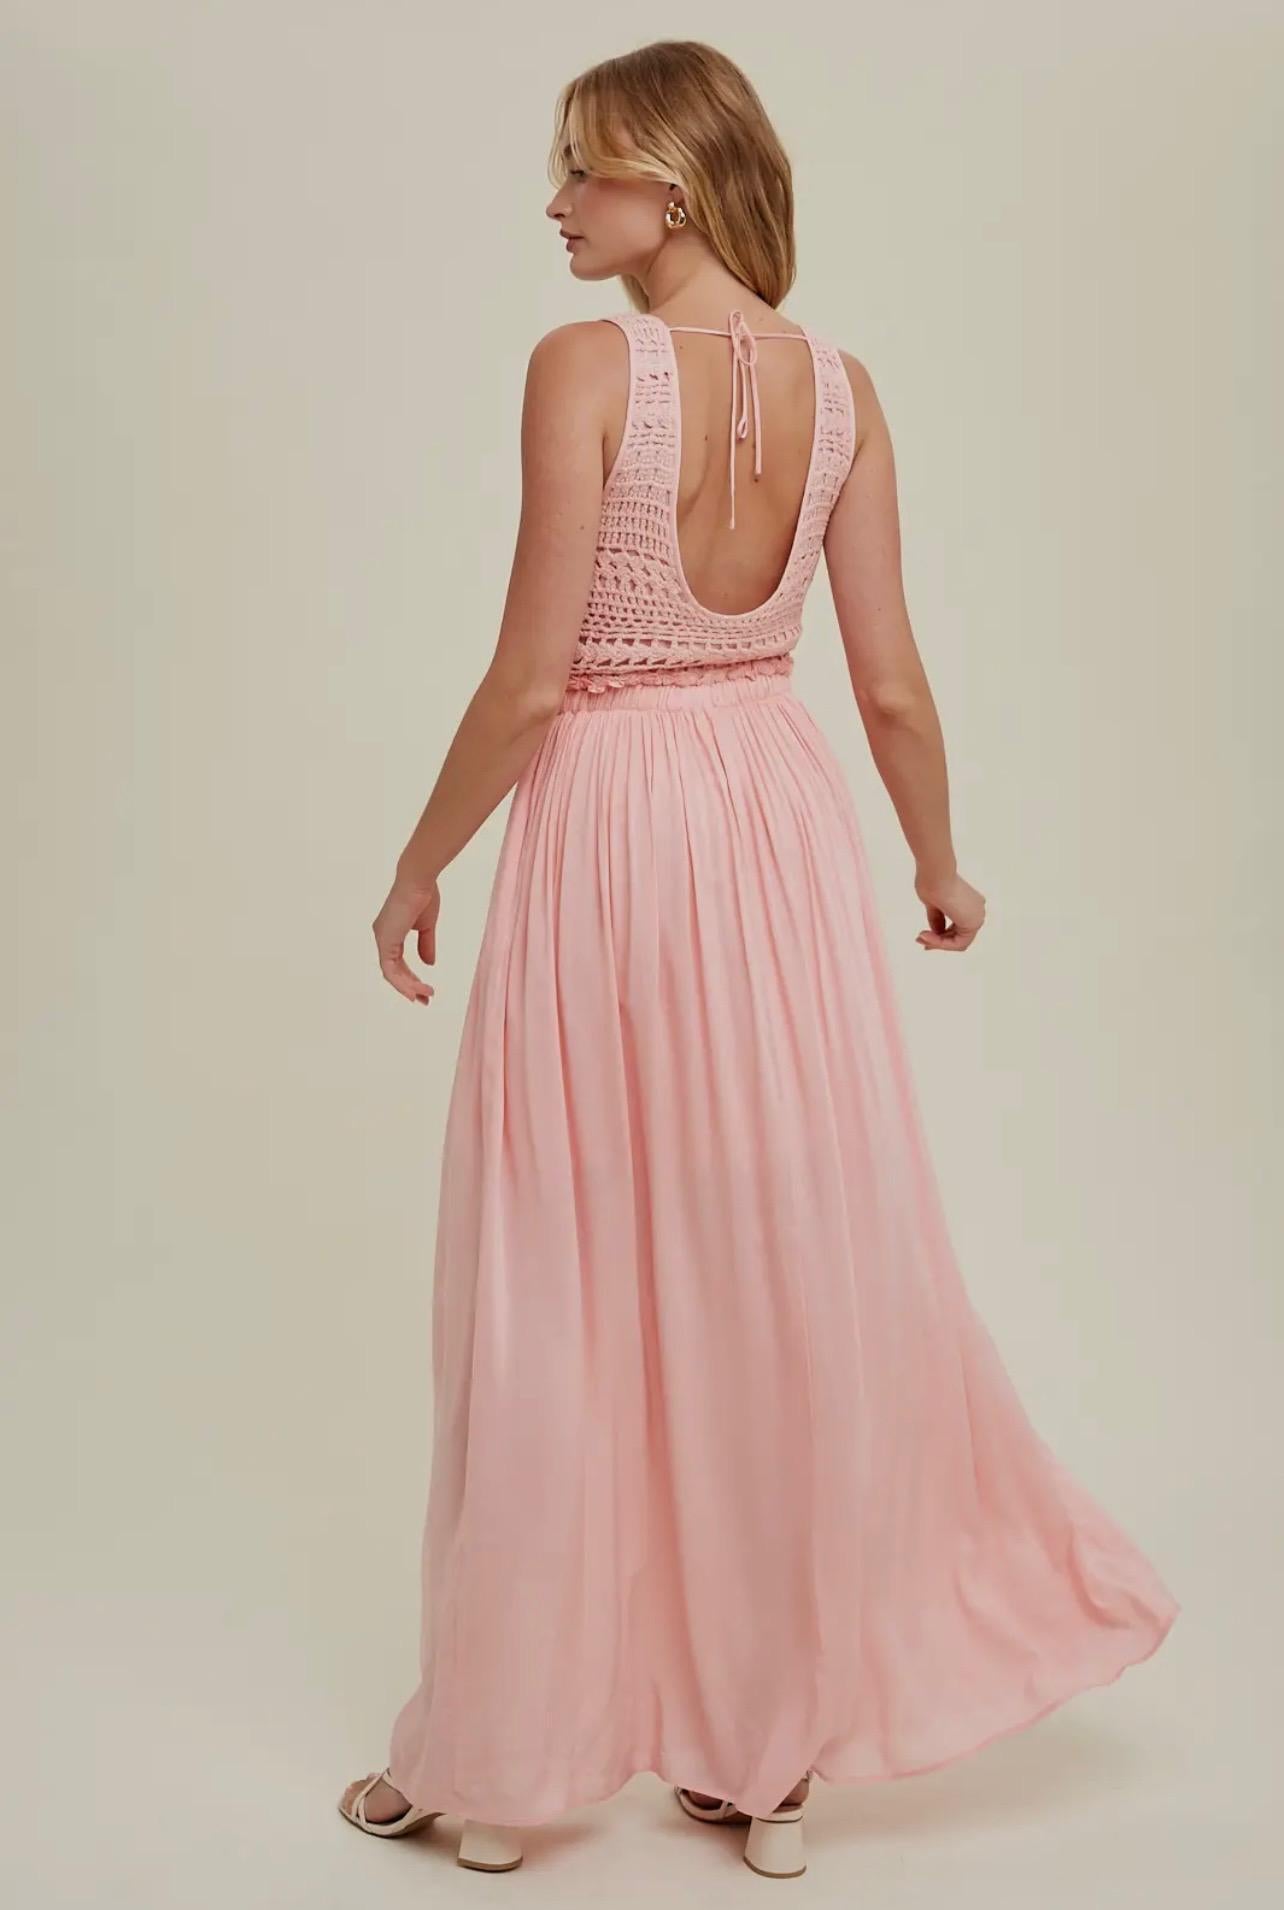 Crochet Lace Detail Maxi Dress with Side Pockets (Pink)